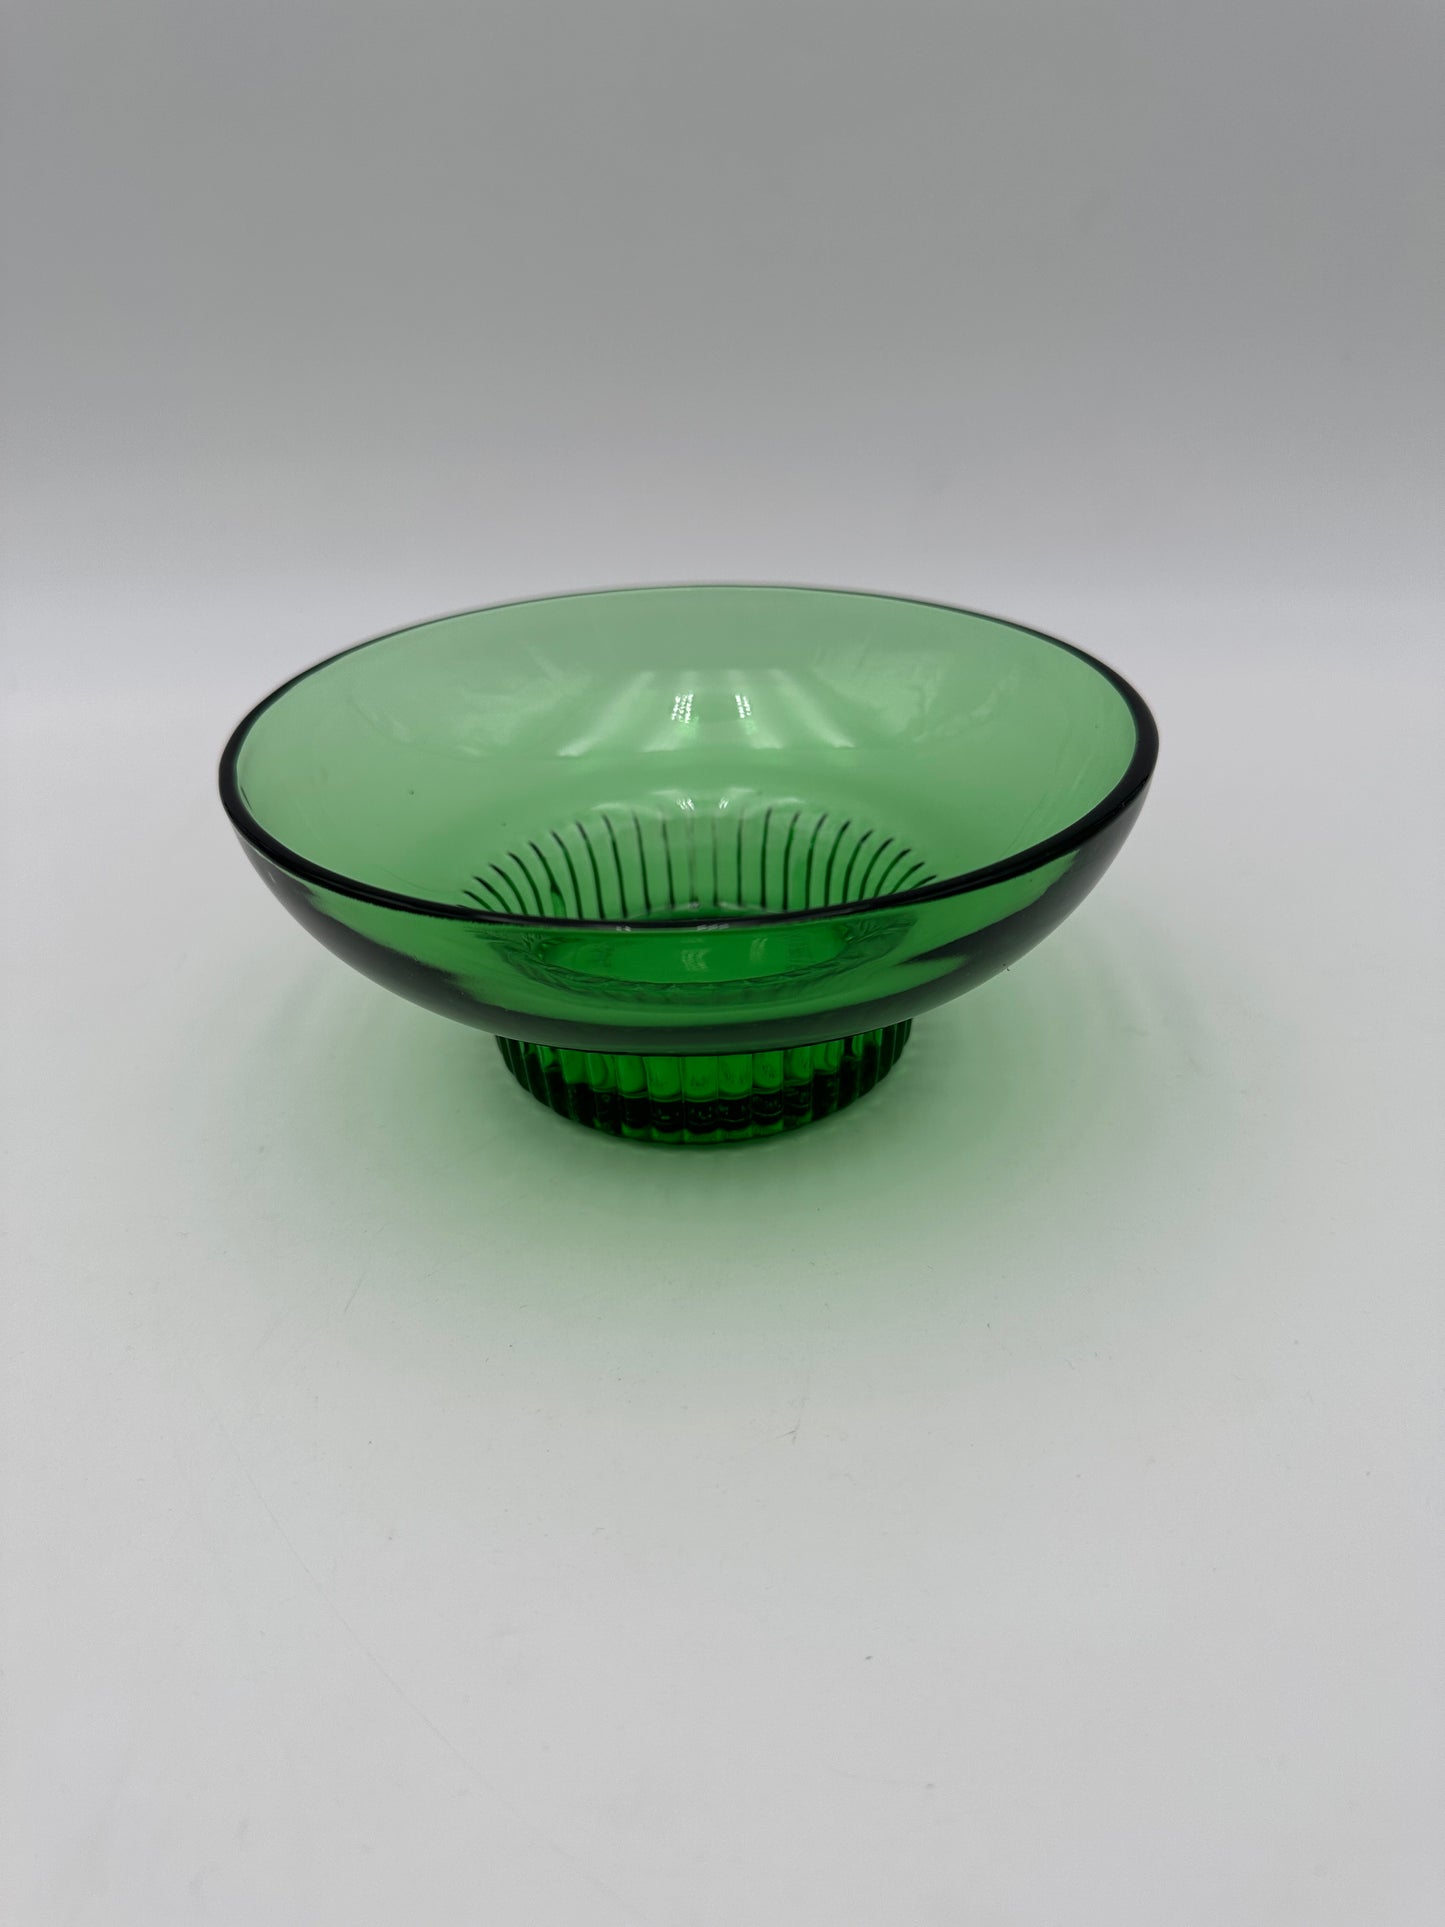 A.L. Randall Emerald Green Vintage Round Footed Bowl Candy Dish